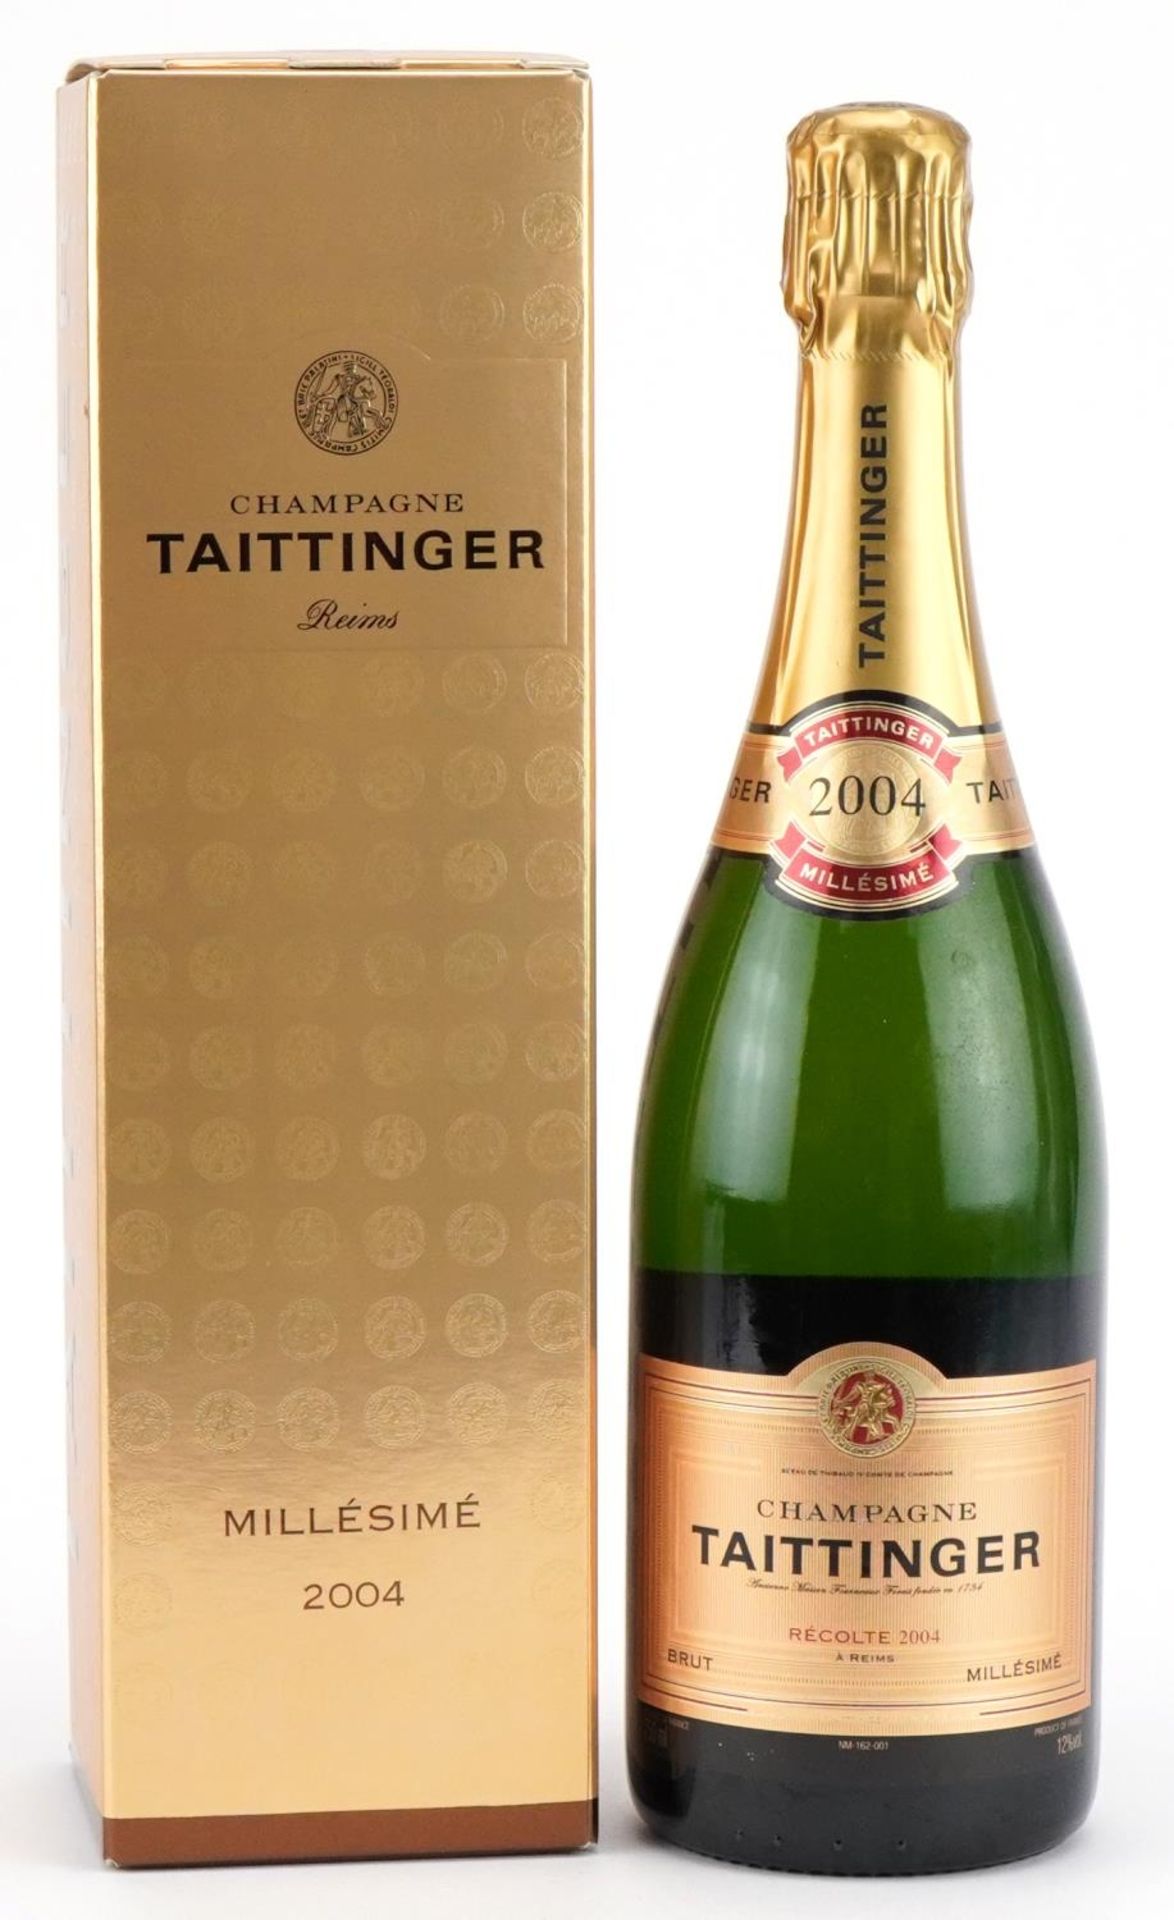 Bottle of 2004 Tattinger Millesime Champagne with box : For further information on this lot please